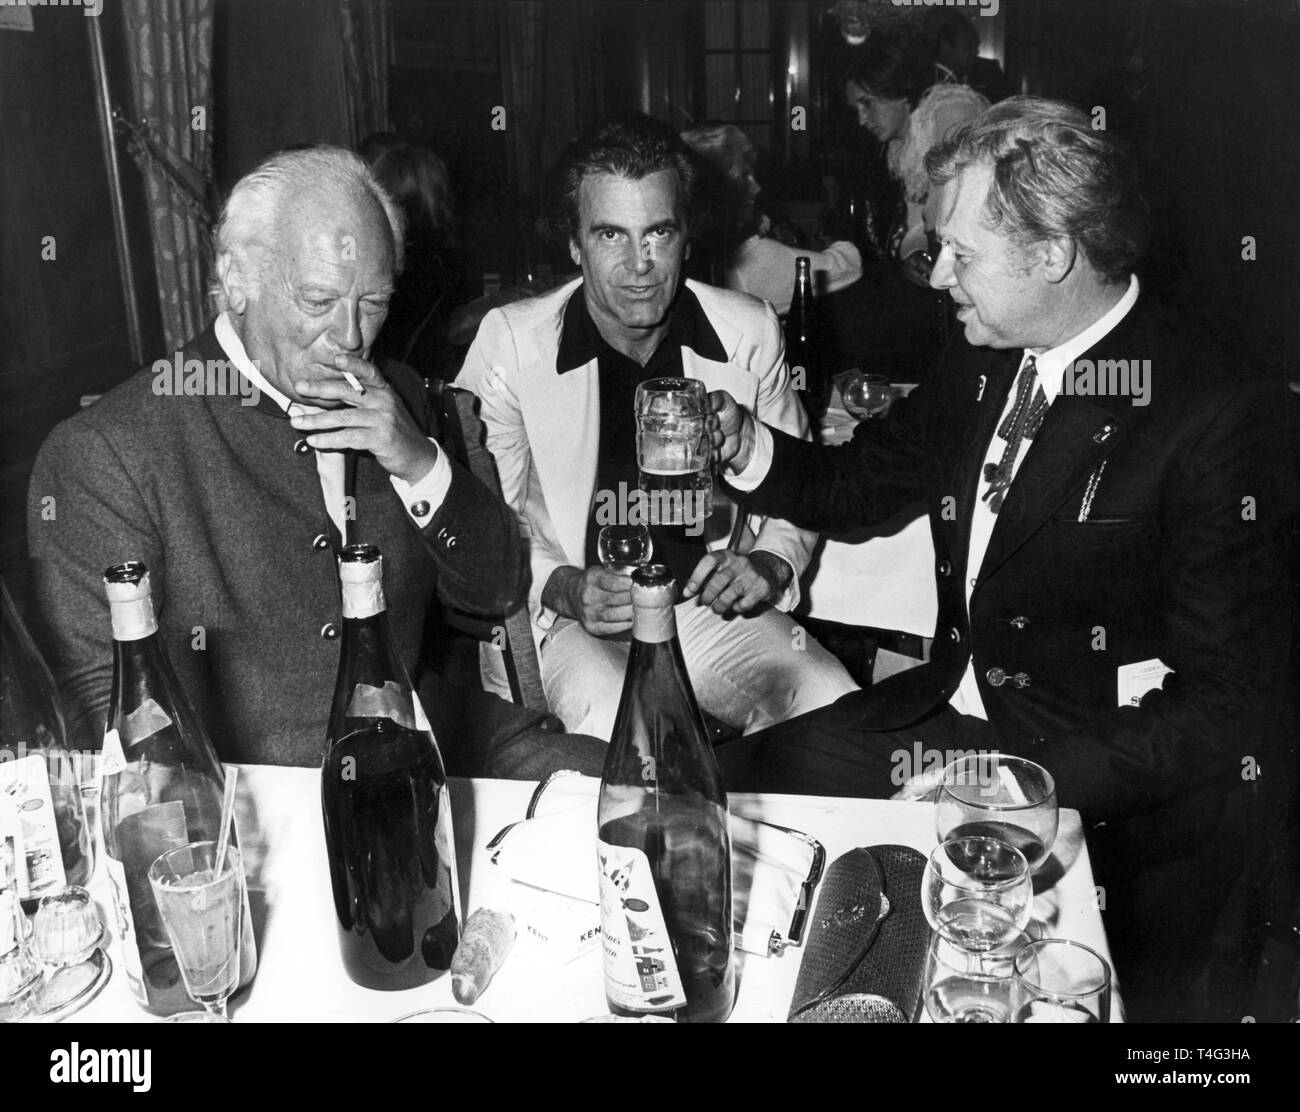 Host Curd Jürgens (l), Maximilian Schell (c), who is about to act as Jedermann during the next Festival, and Walter Reyer, Jürgens' predecessor as Jedermann, during the final party after the 'Jedermann' performance during the Salzburg Festival at castle Klessheim on 28 August 1977. | usage worldwide Stock Photo